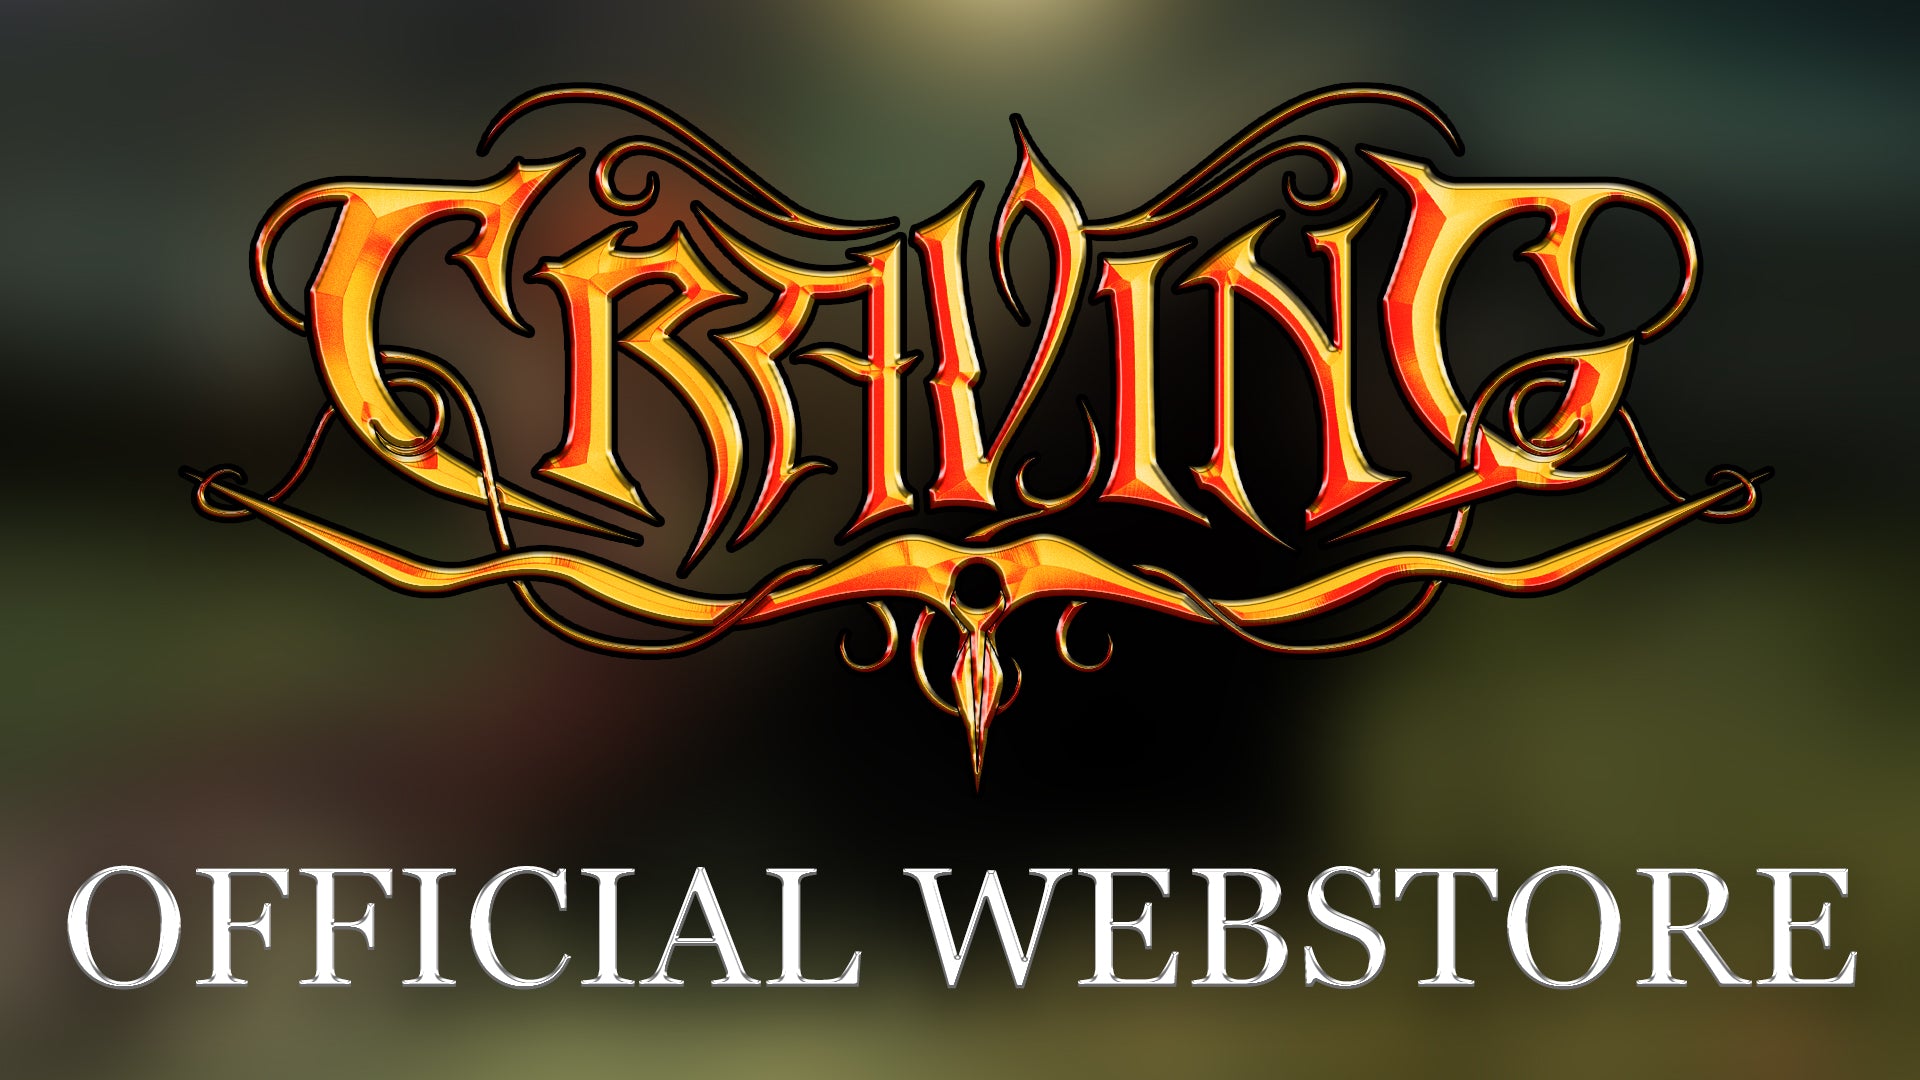 Load video: Fragen? Schreibe uns: support@cravingmetal.de &lt;br&gt; Do you have any Questions? Mail us: support@cravingmetal.de